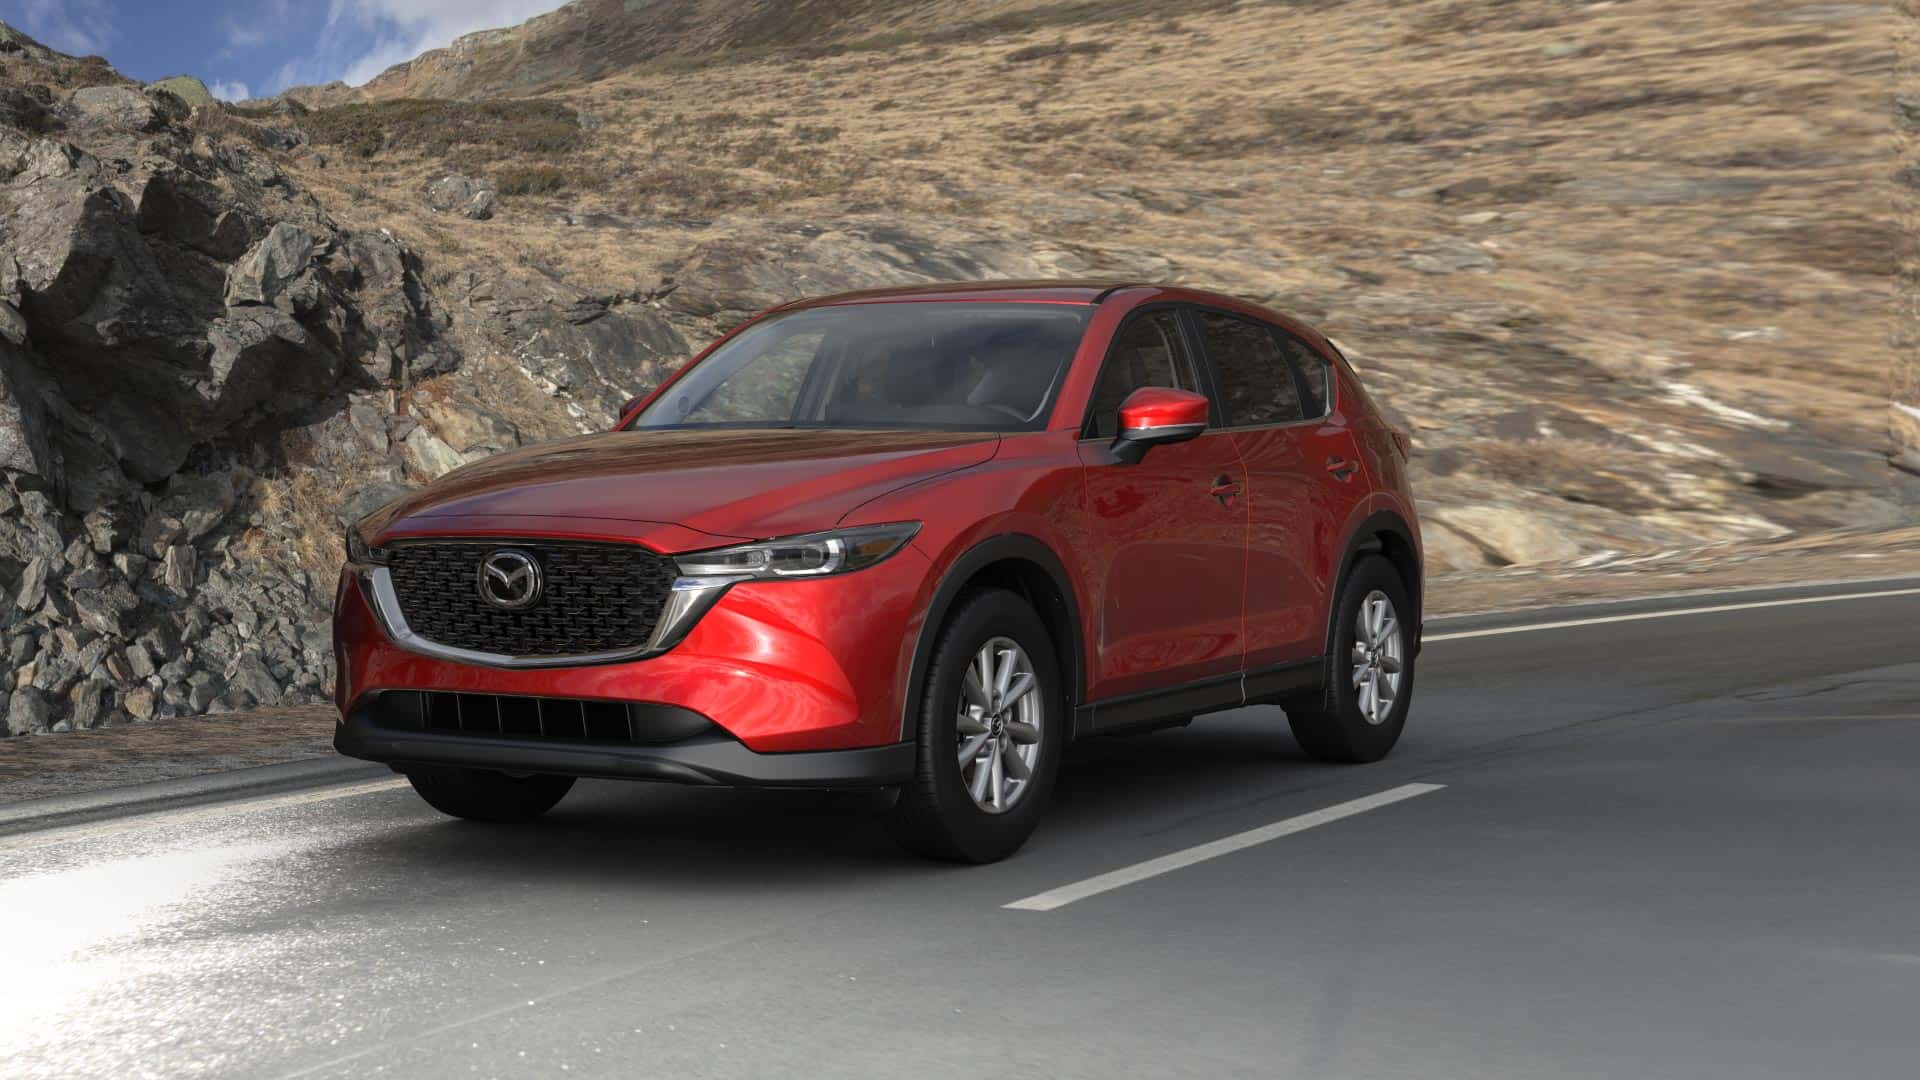 2023 Mazda CX-5 2.5 S Select Soul Red Crystal Metallic | Russell & Smith Mazda in Houston TX